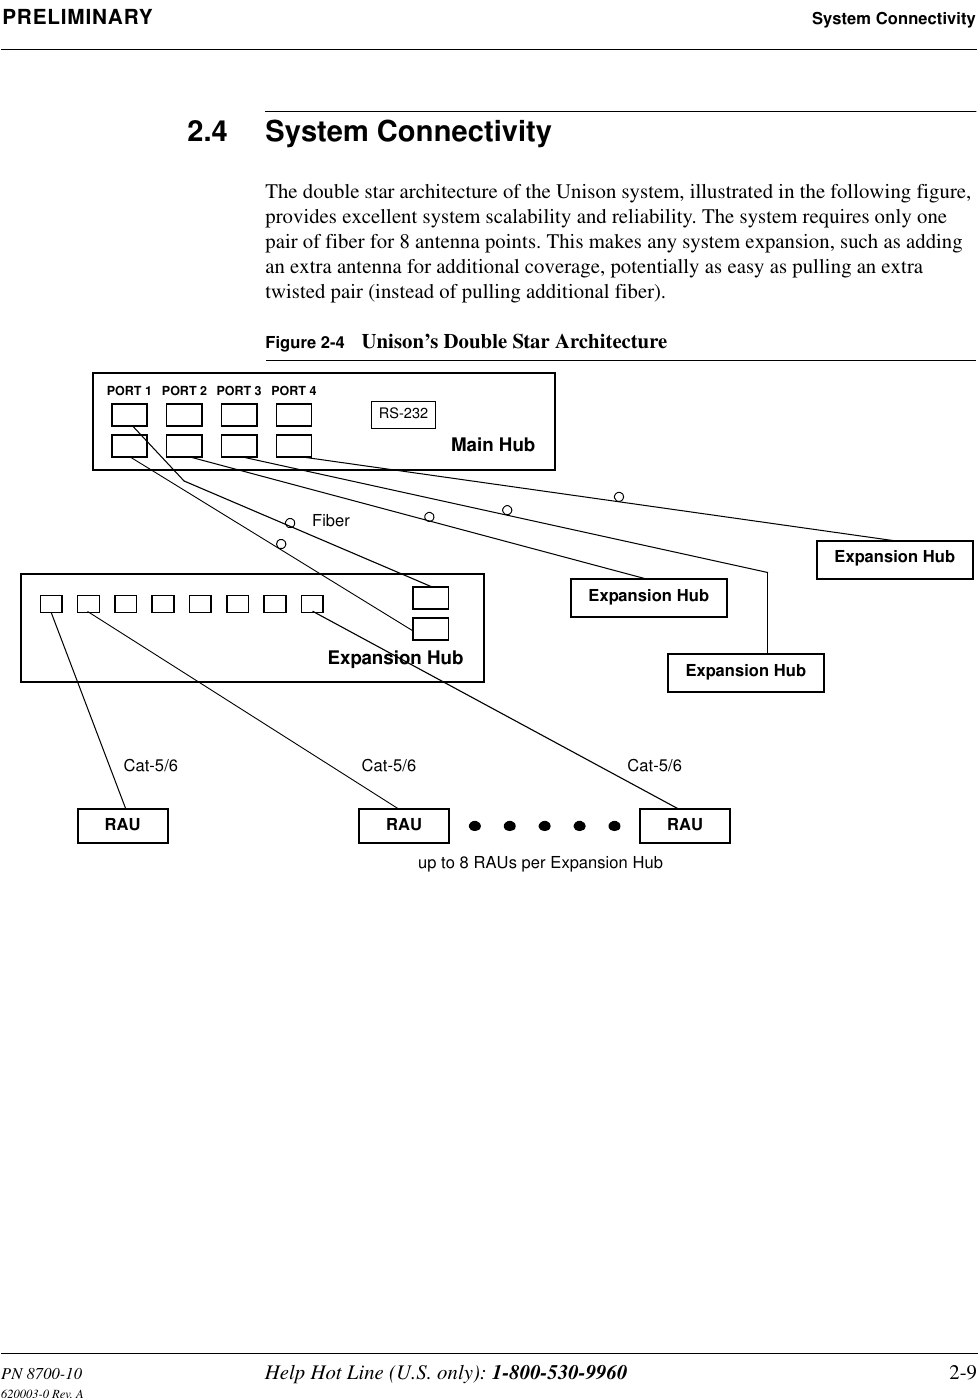 PN 8700-10 Help Hot Line (U.S. only): 1-800-530-9960 2-9620003-0 Rev. APRELIMINARY System Connectivity2.4 System ConnectivityThe double star architecture of the Unison system, illustrated in the following figure, provides excellent system scalability and reliability. The system requires only one pair of fiber for 8 antenna points. This makes any system expansion, such as adding an extra antenna for additional coverage, potentially as easy as pulling an extra twisted pair (instead of pulling additional fiber).Figure 2-4 Unison’s Double Star ArchitectureMain HubRS-232PORT 1 PORT 2 PORT 3 PORT 4Expansion Hub Expansion HubFiberExpansion HubExpansion HubCat-5/6Cat-5/6 Cat-5/6up to 8 RAUs per Expansion HubRAU RAU RAU